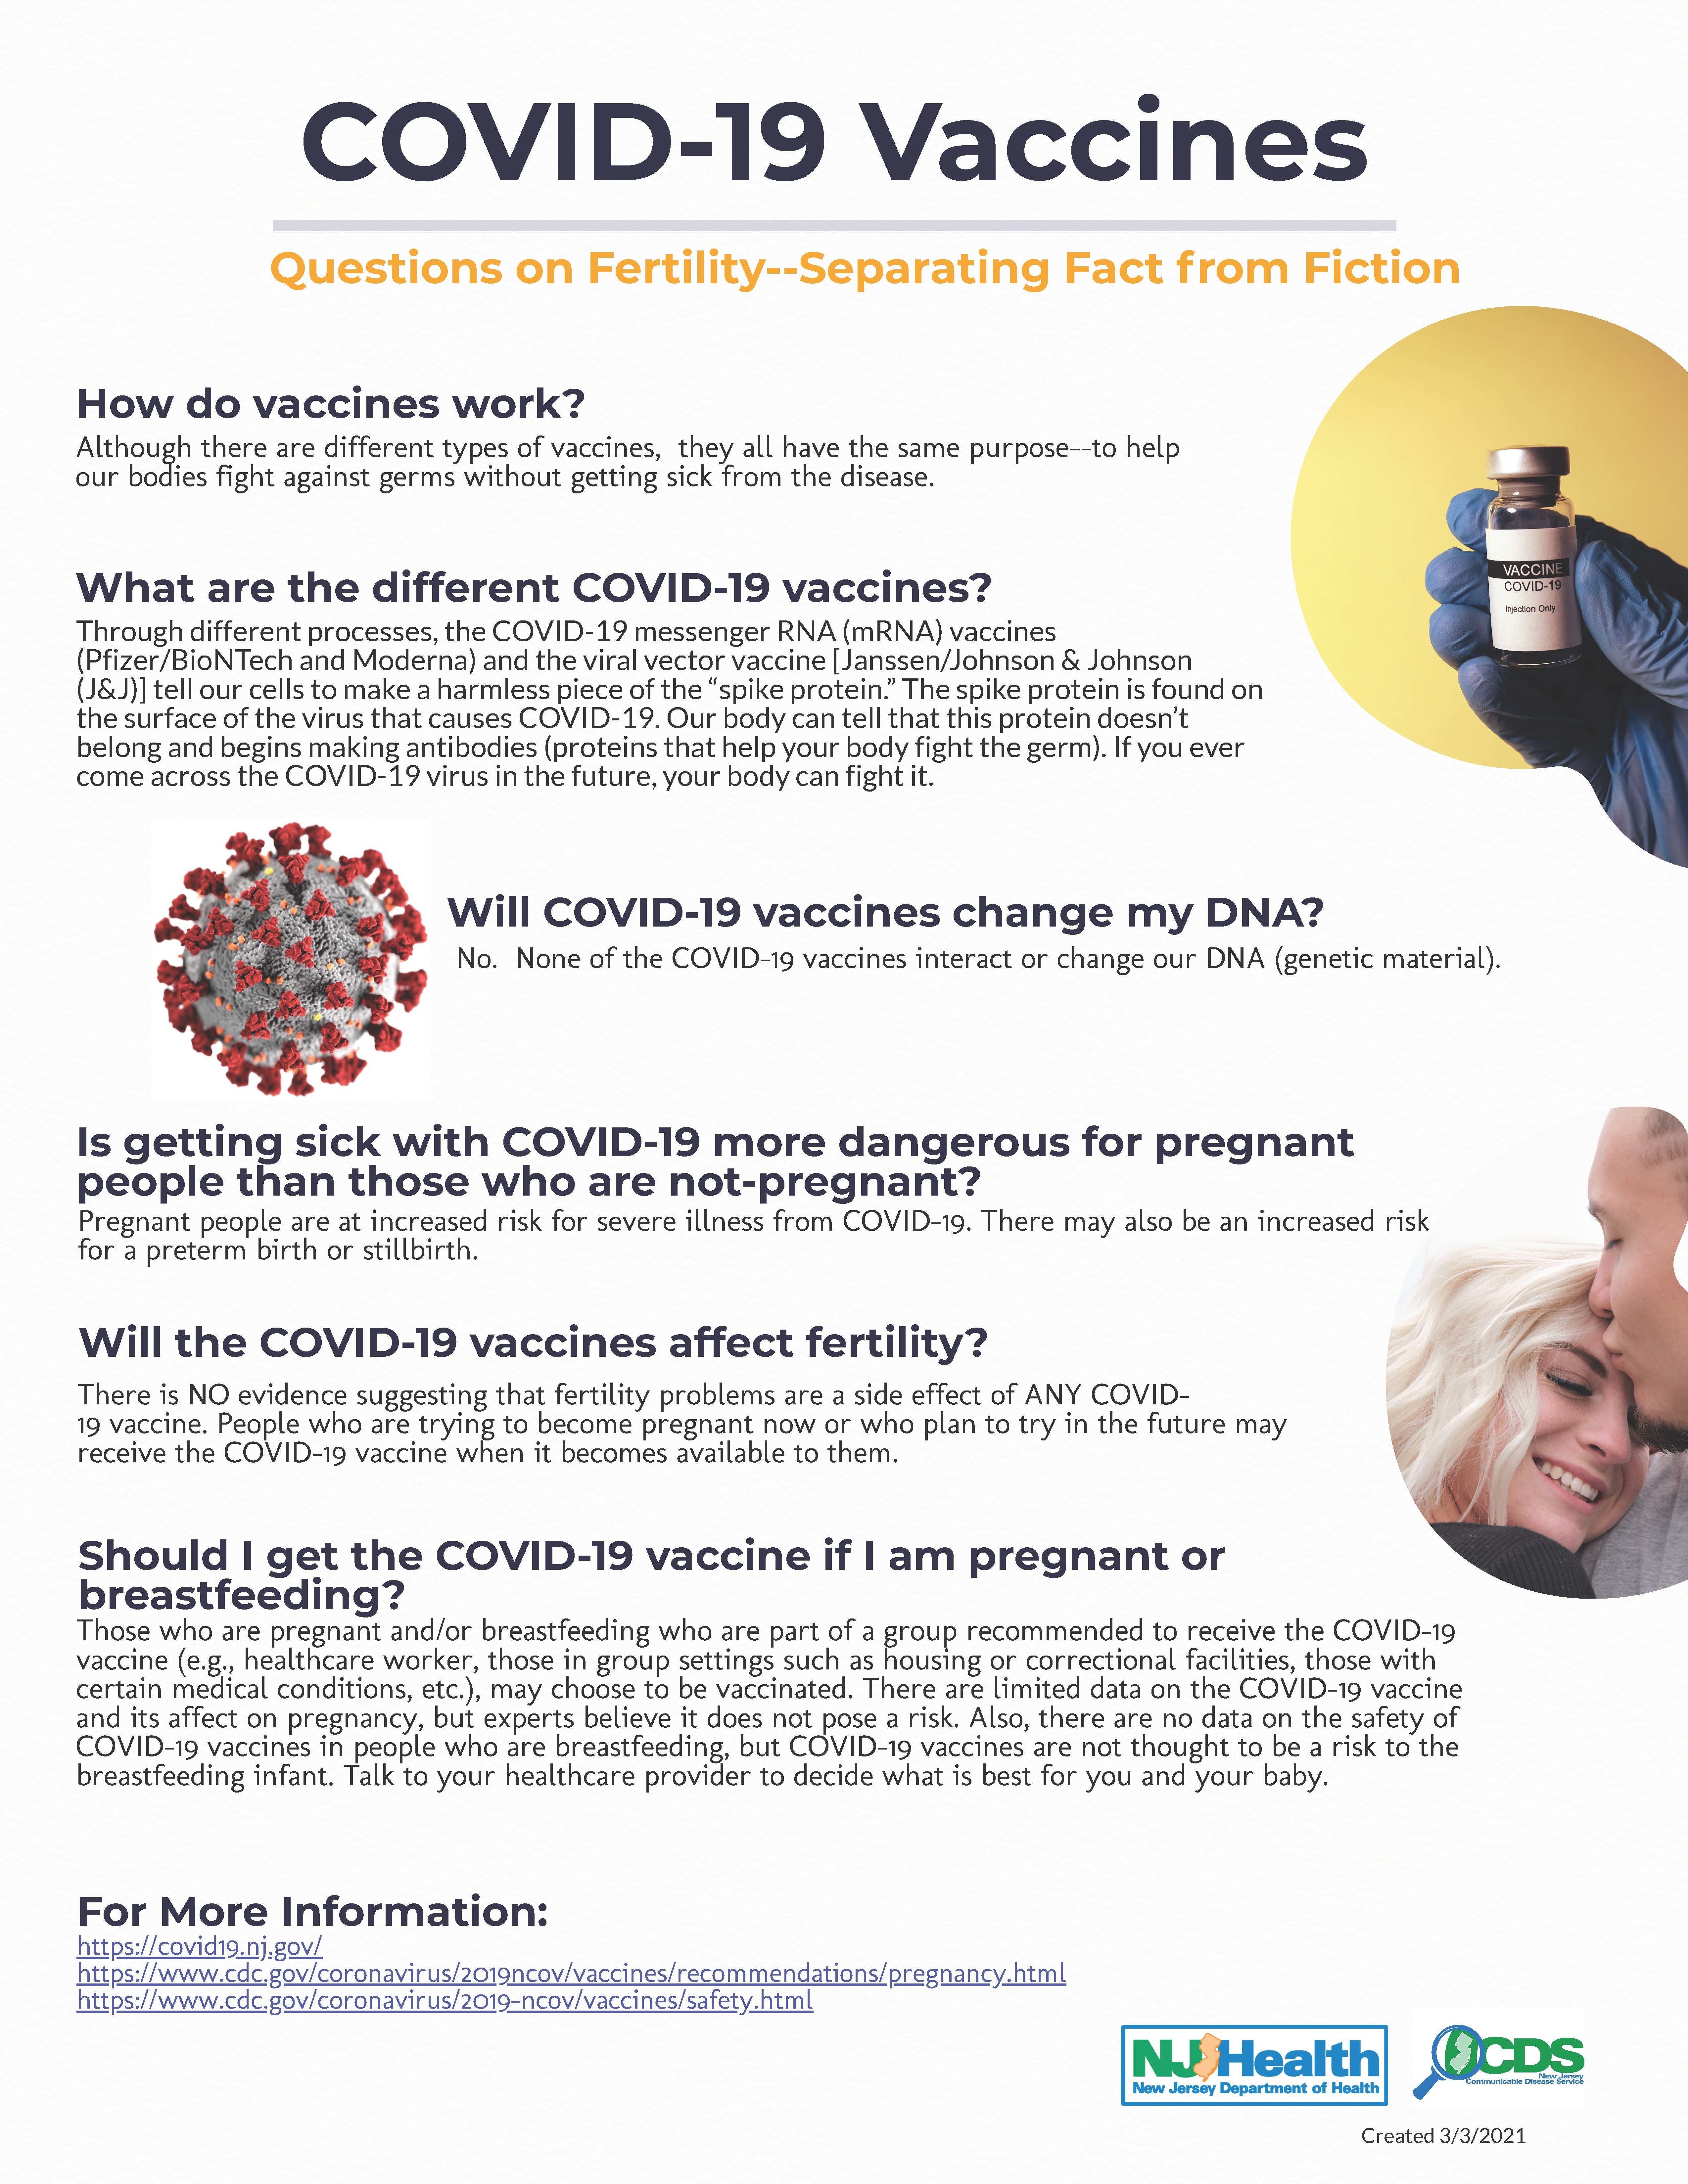 Fertility and COVID-19 Vaccine flyer